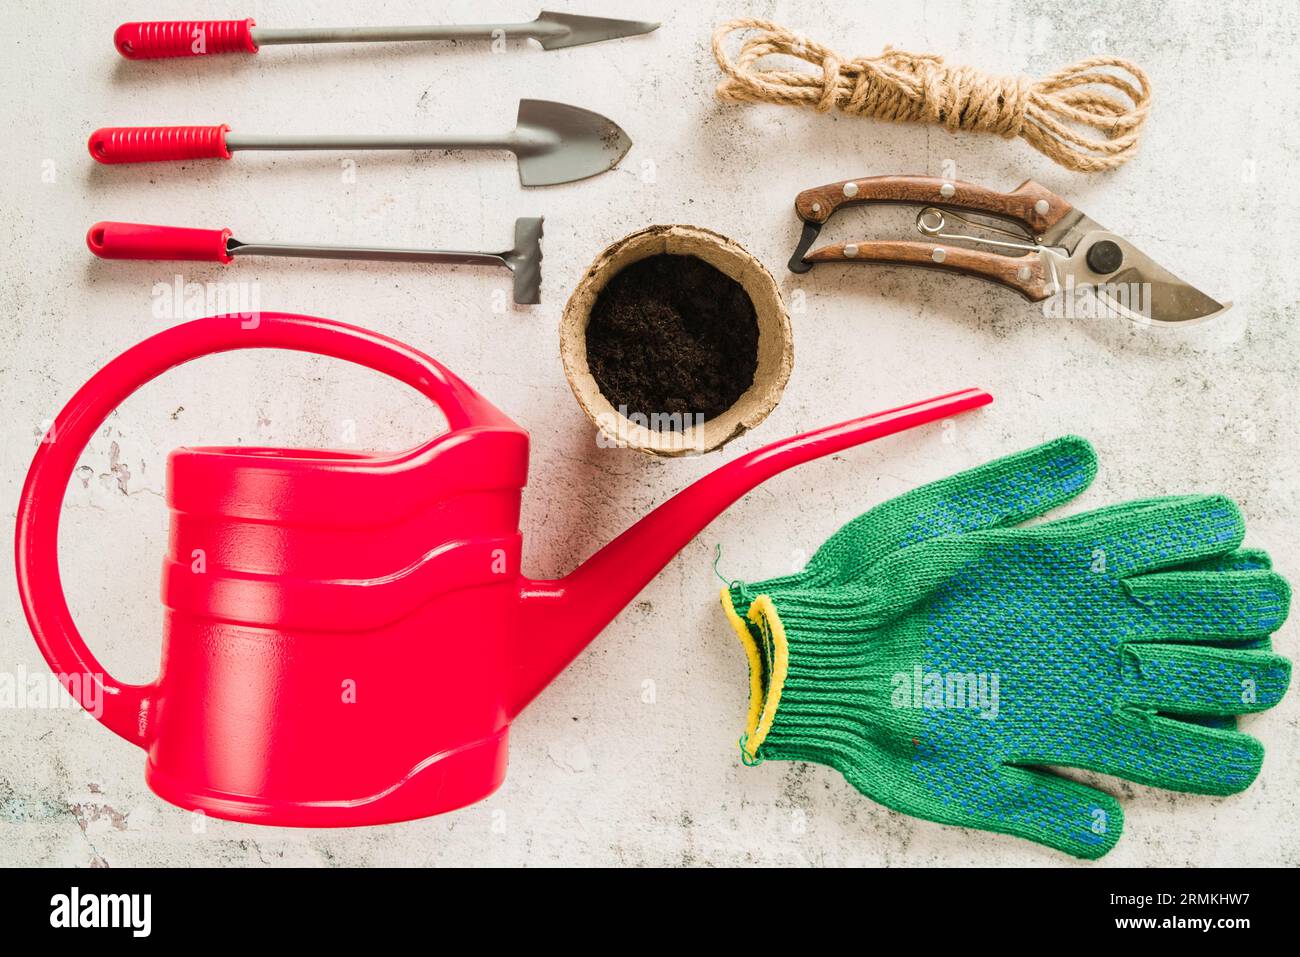 Gardening equipment watering can peat pot secateurs rope gardening gloves concrete backdrop Stock Photo